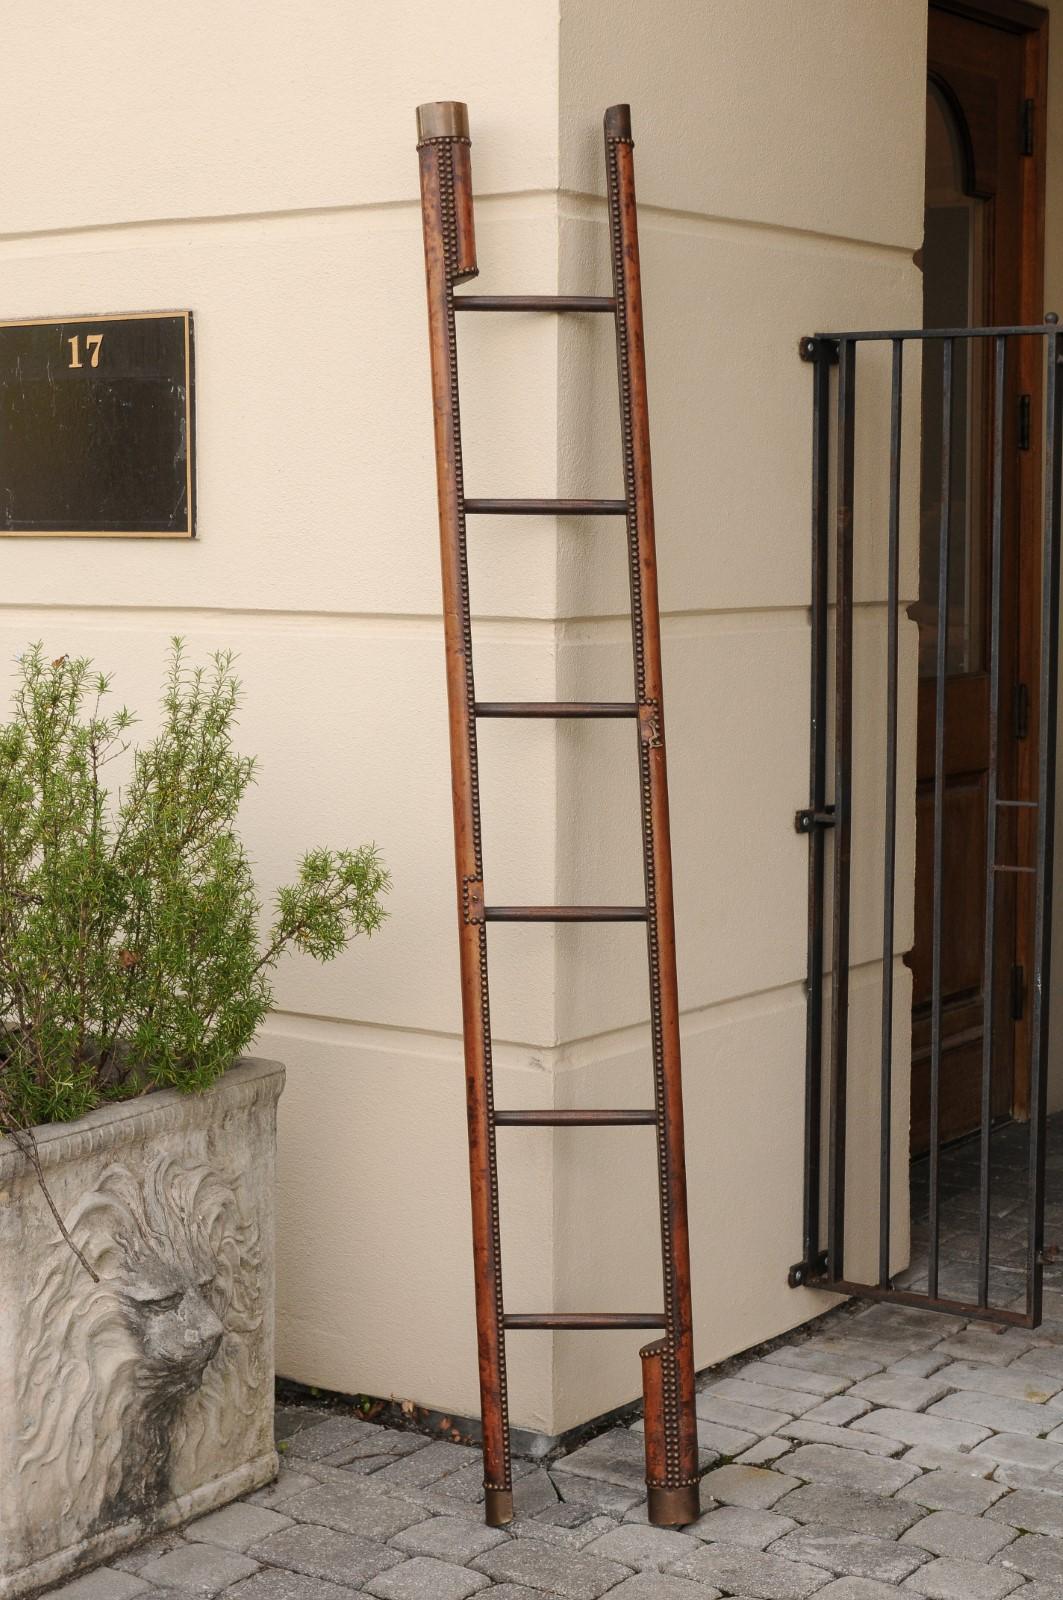 An English Edwardian leather covered wooden folding ladder from the early 20th century, with nailhead trim. Born during the first quarter of the 20th century, this folding ladder features a rounded wooden structure covered with brown leather,